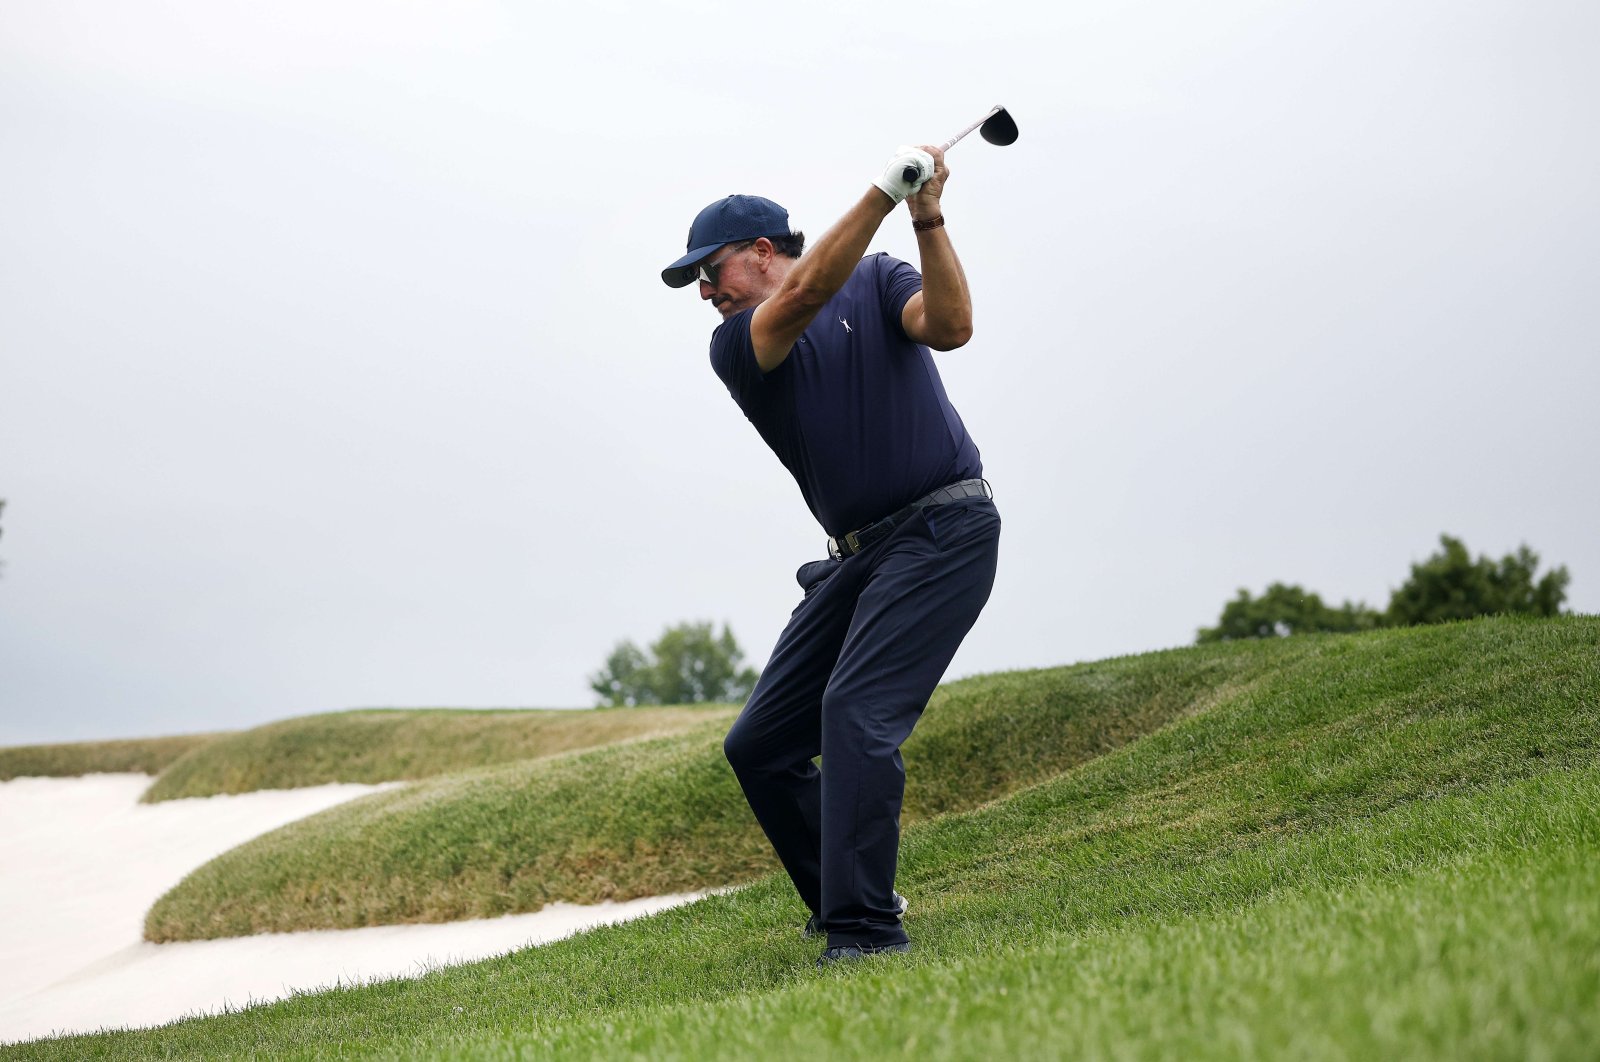 Phil Mickelson plays at LIV Golf Invitational, in New Jersey, United States, July 29, 2022. (AFP PHOTO)